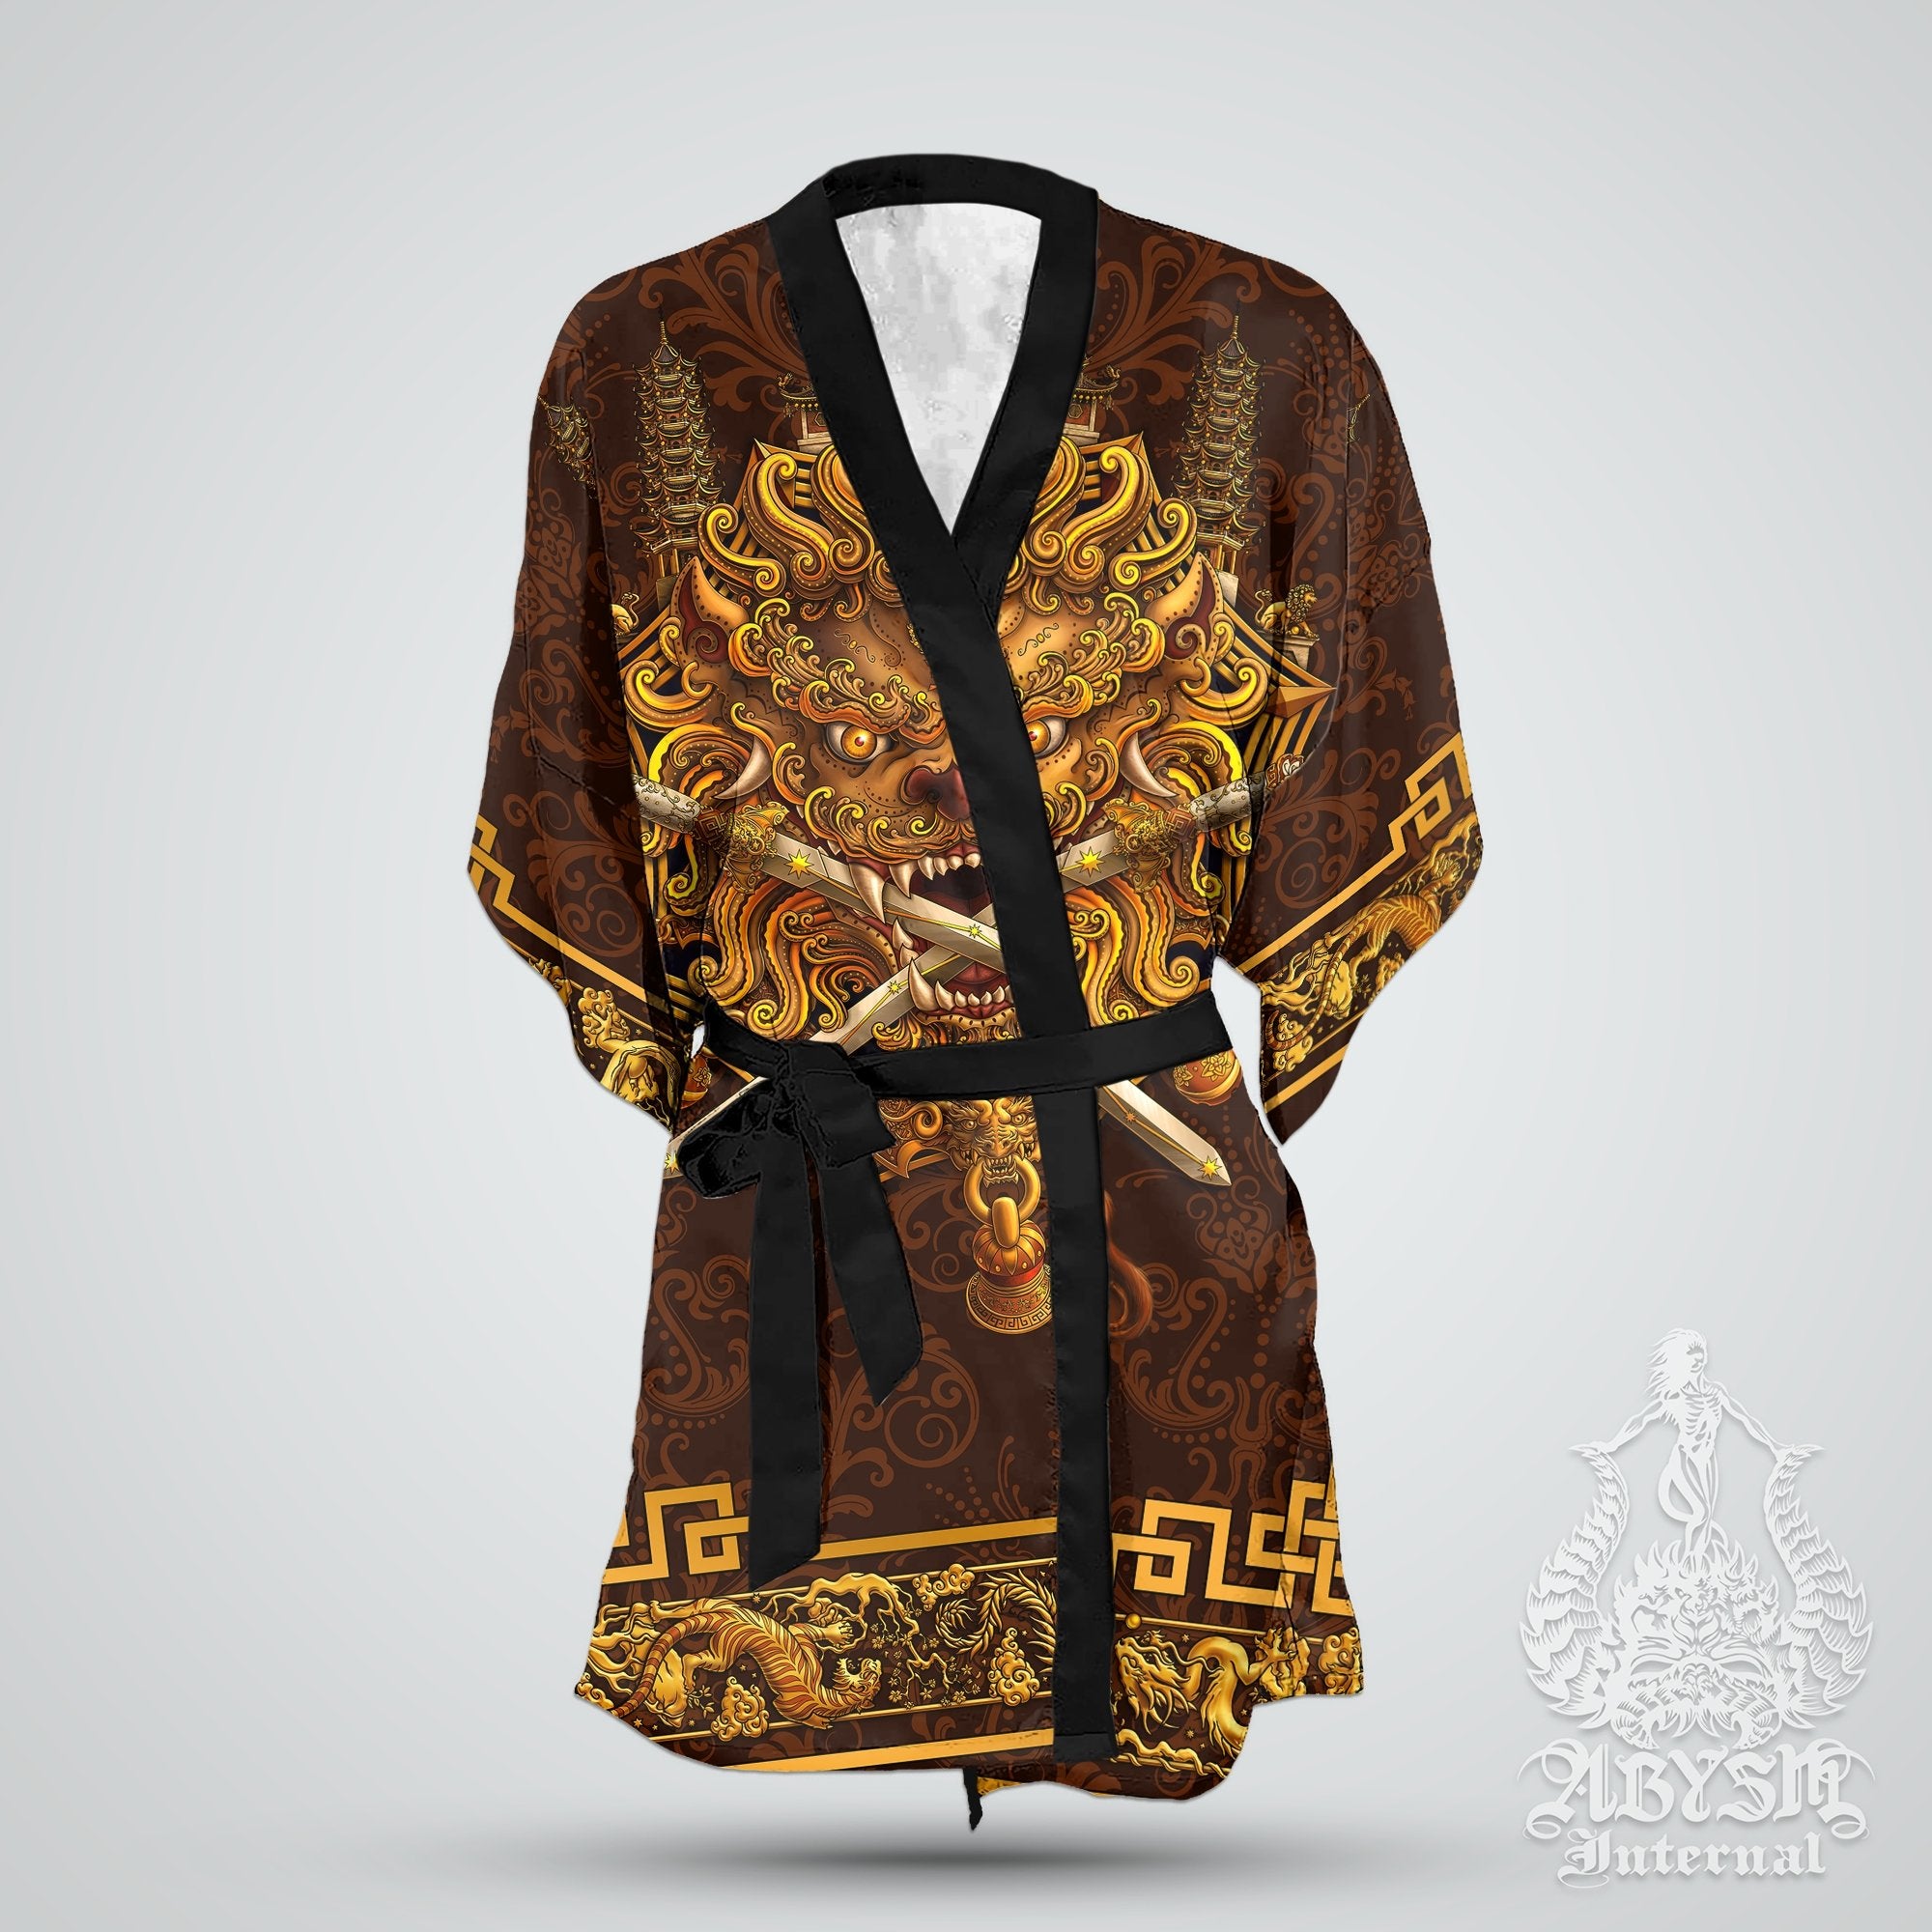 Sword Lion Cover Up, Beach Outfit, Chinese Party Kimono, Taiwan Summer Festival Robe, Asian Indie and Alternative Clothing, Unisex - Gold - Abysm Internal